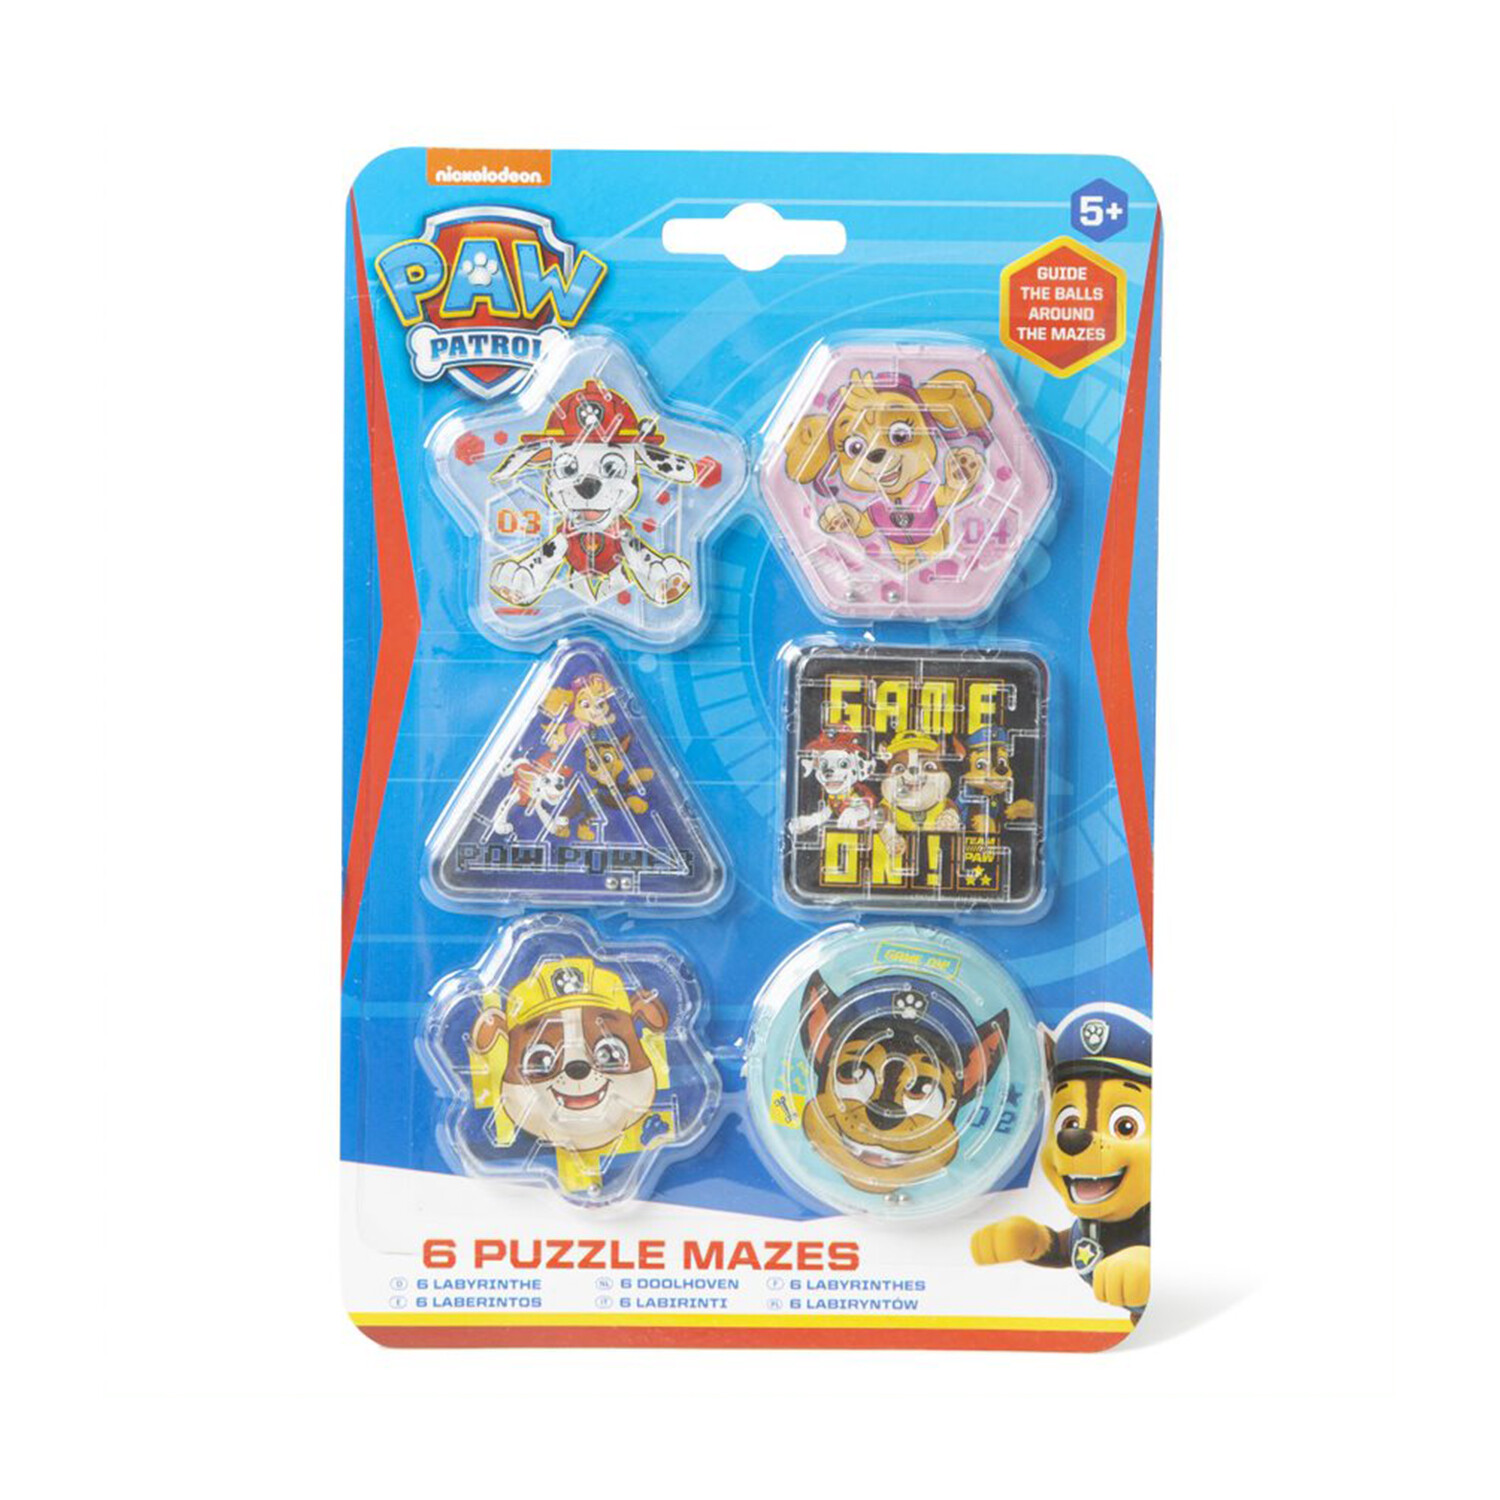 Pack of 6 Paw Patrol Mini Maze Puzzles Image